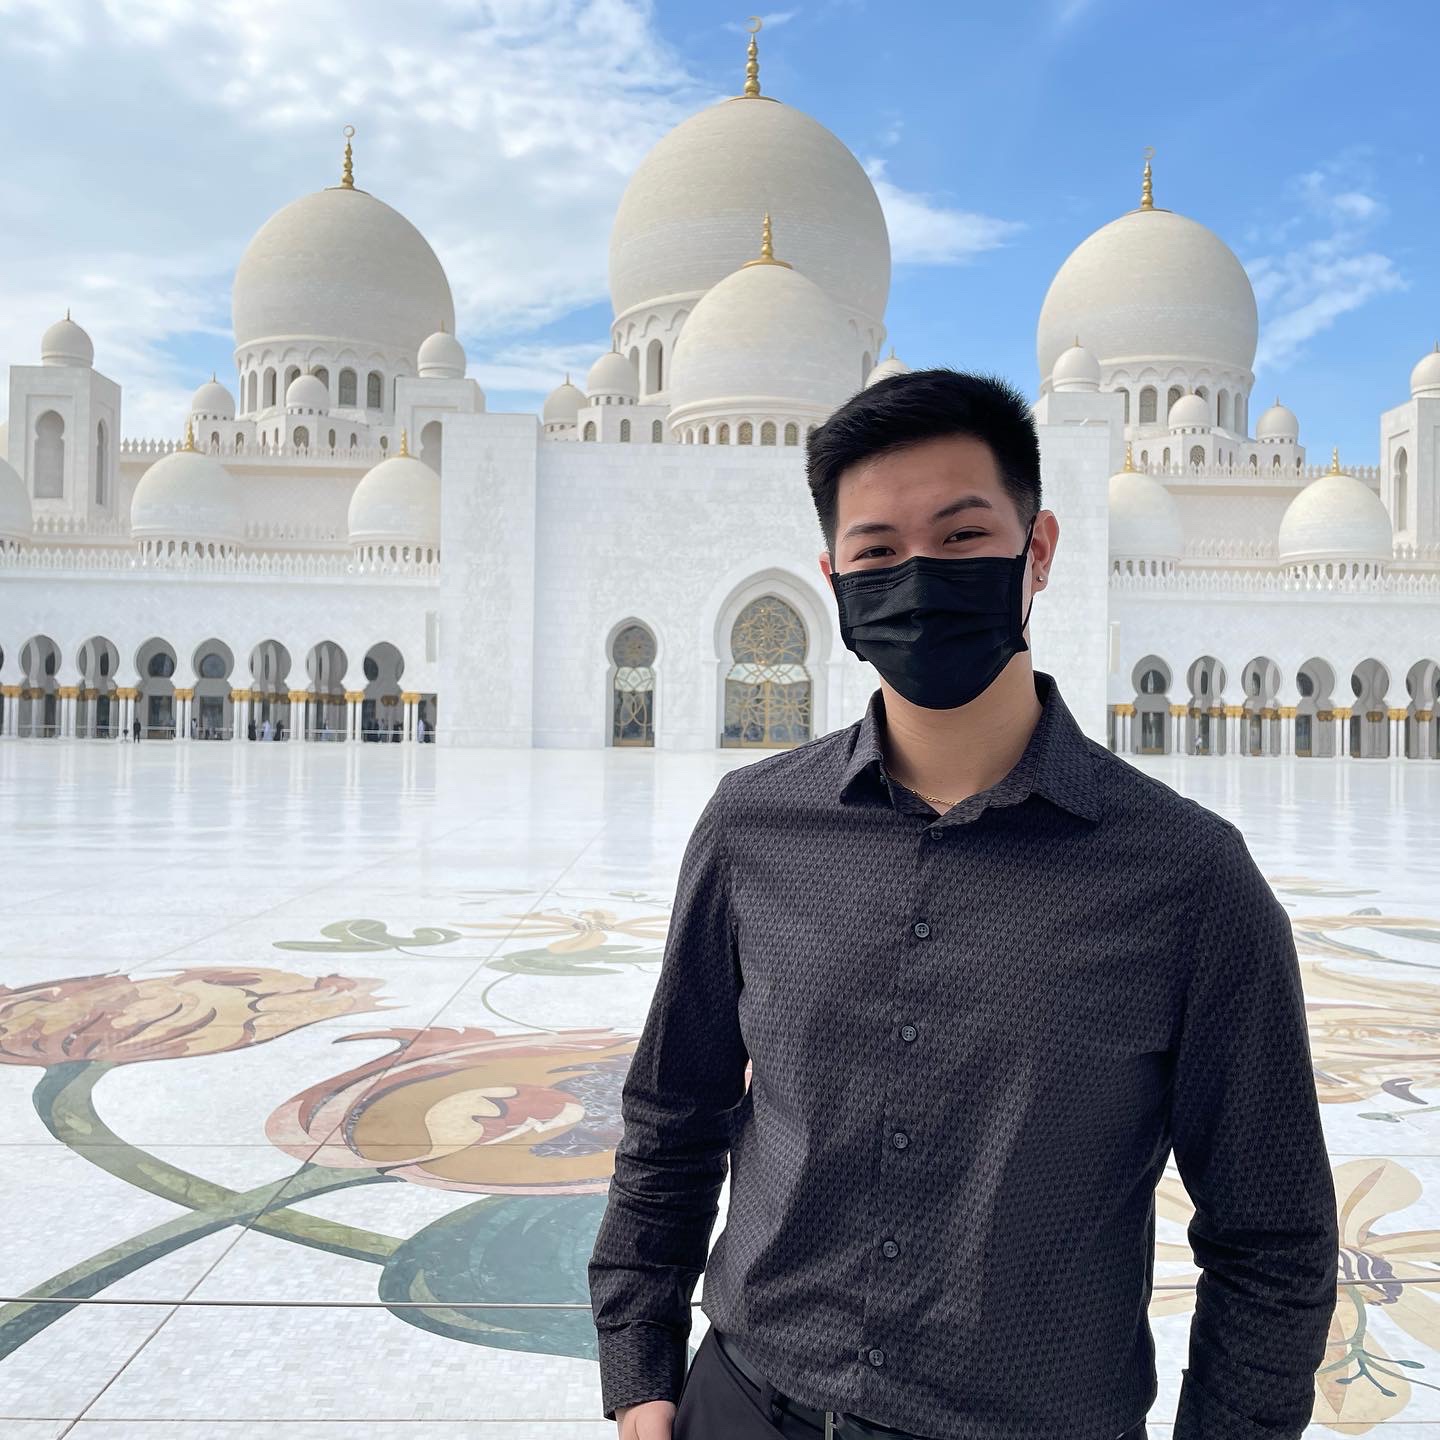 David standing in front of a mosque in UAE.